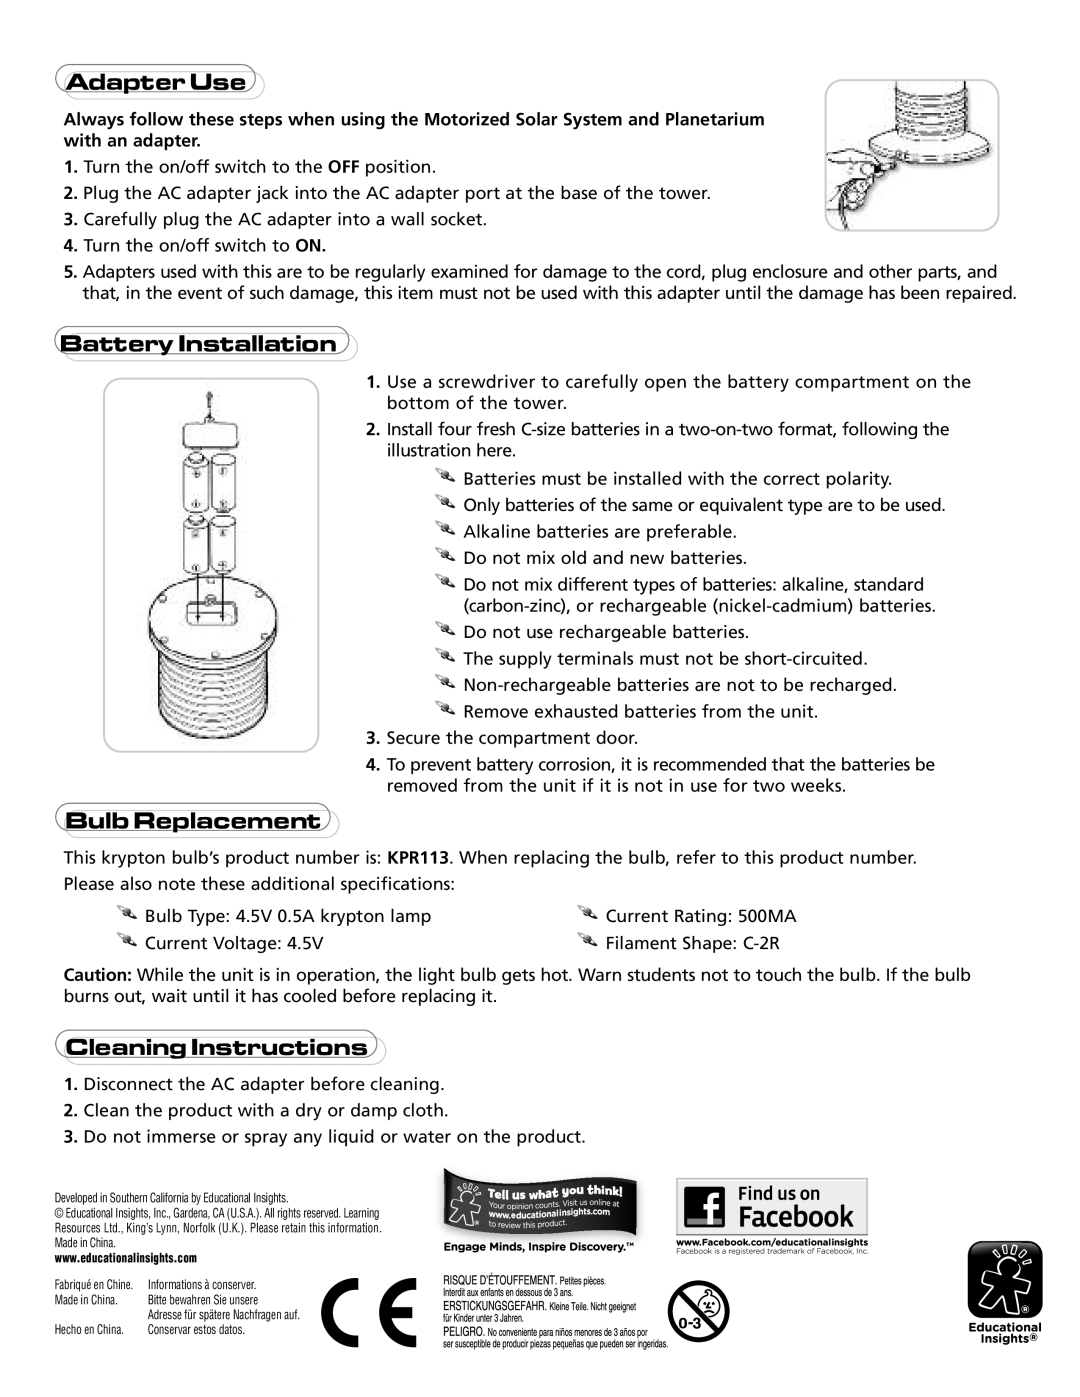 Educational Insights EI-5237 manual AdapterUse, BatteryInstallation, BulbReplacement, CleaningInstructions 